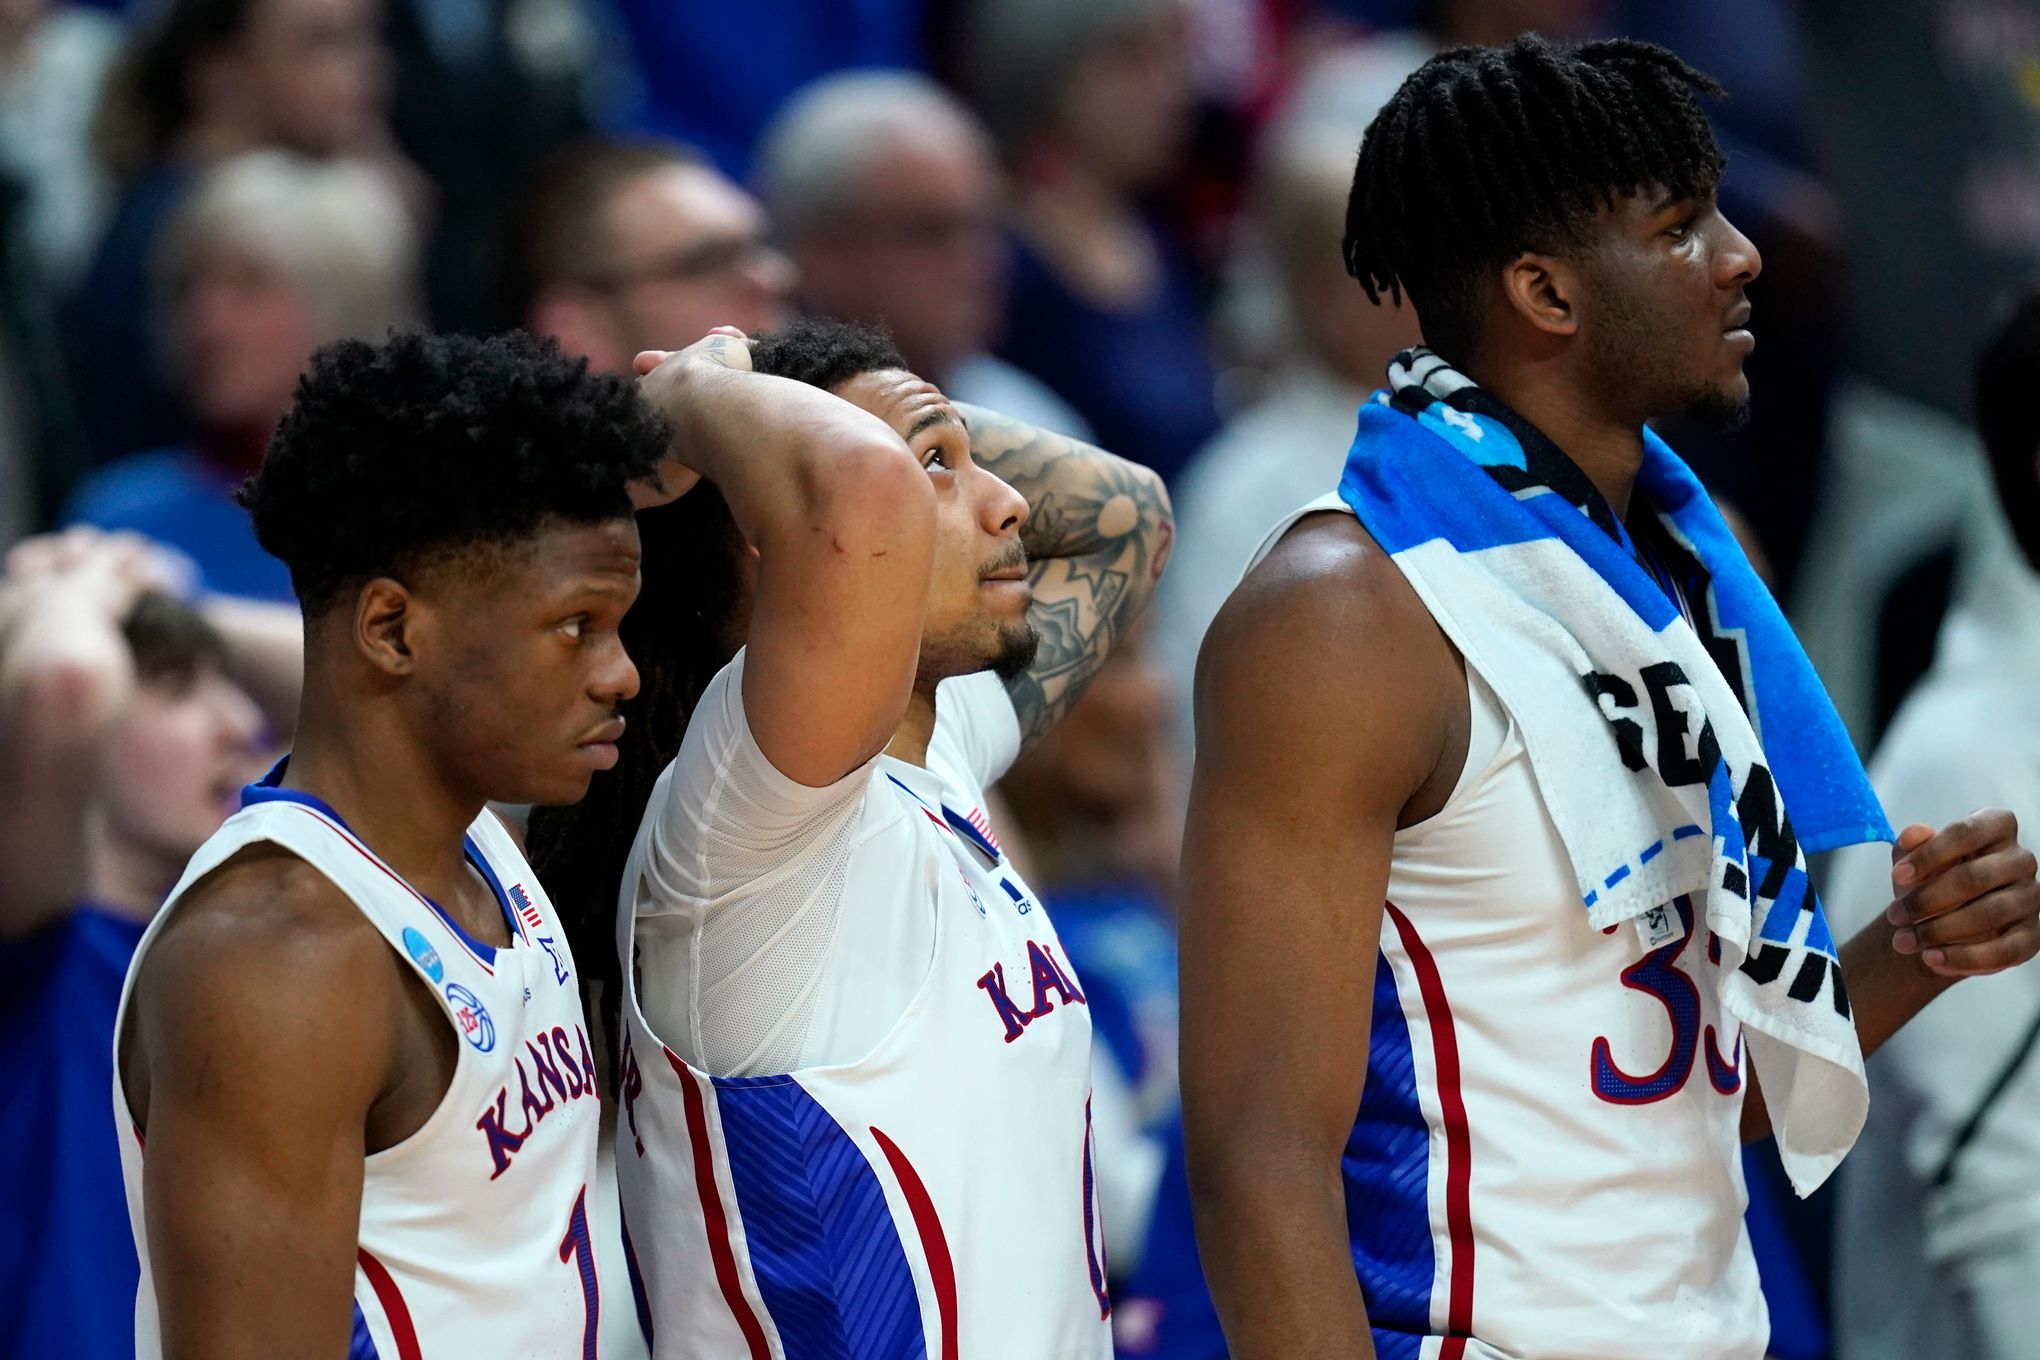 KU season ends with top players shut down, coach sitting out | The Seattle  Times